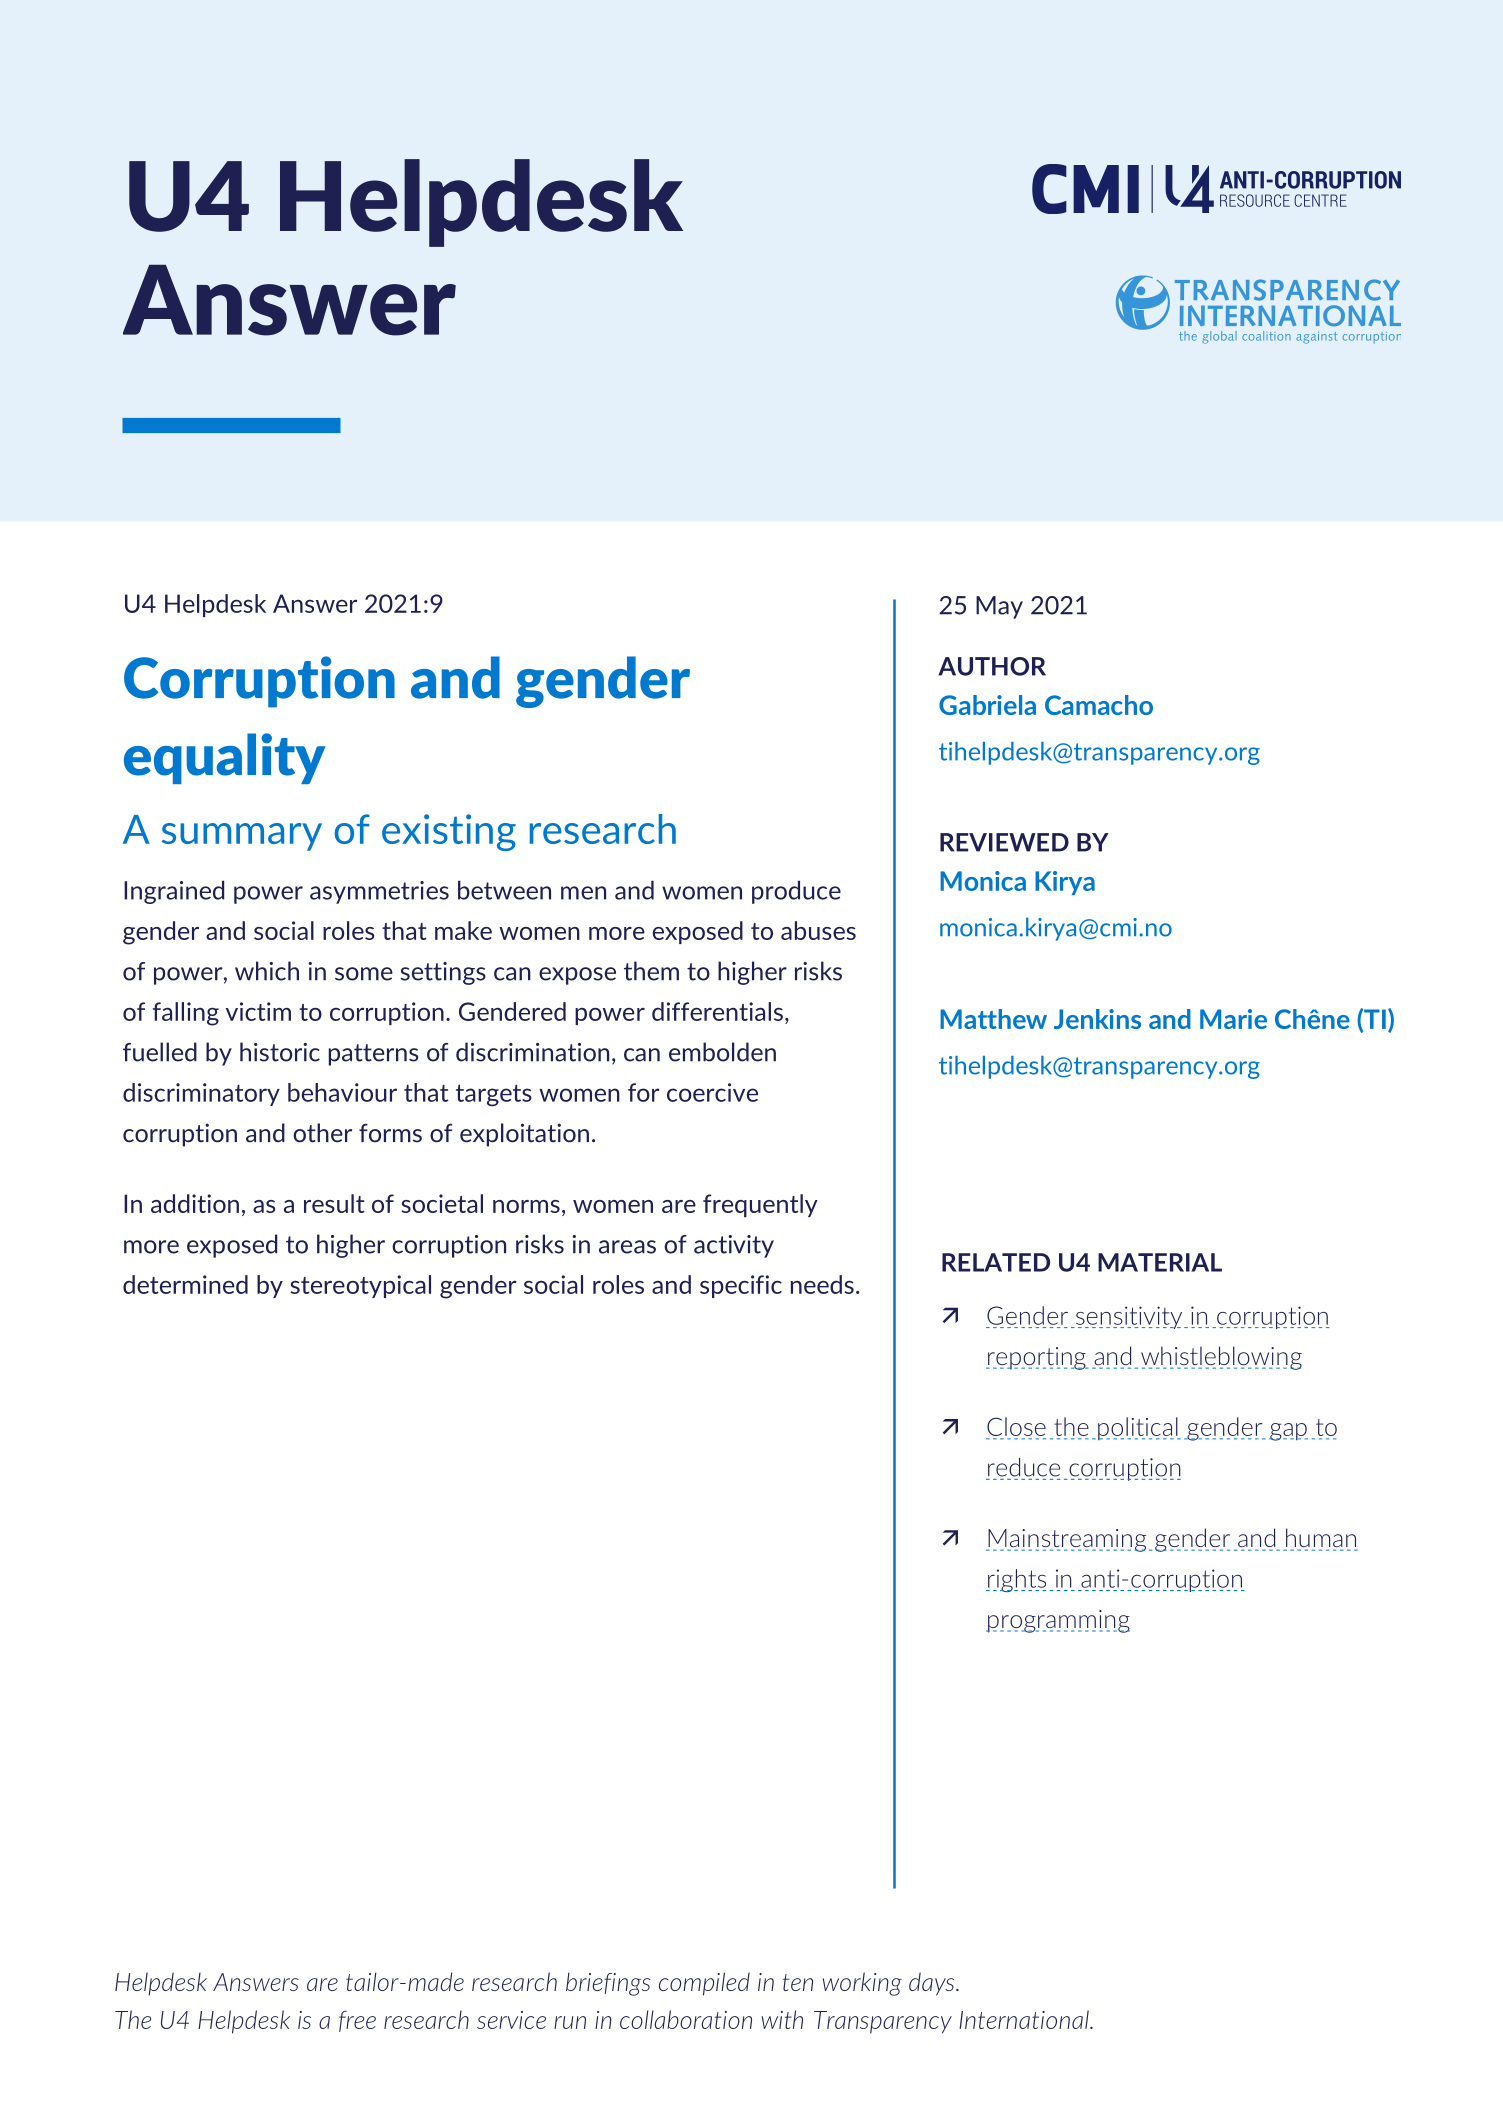 Corruption and gender equality